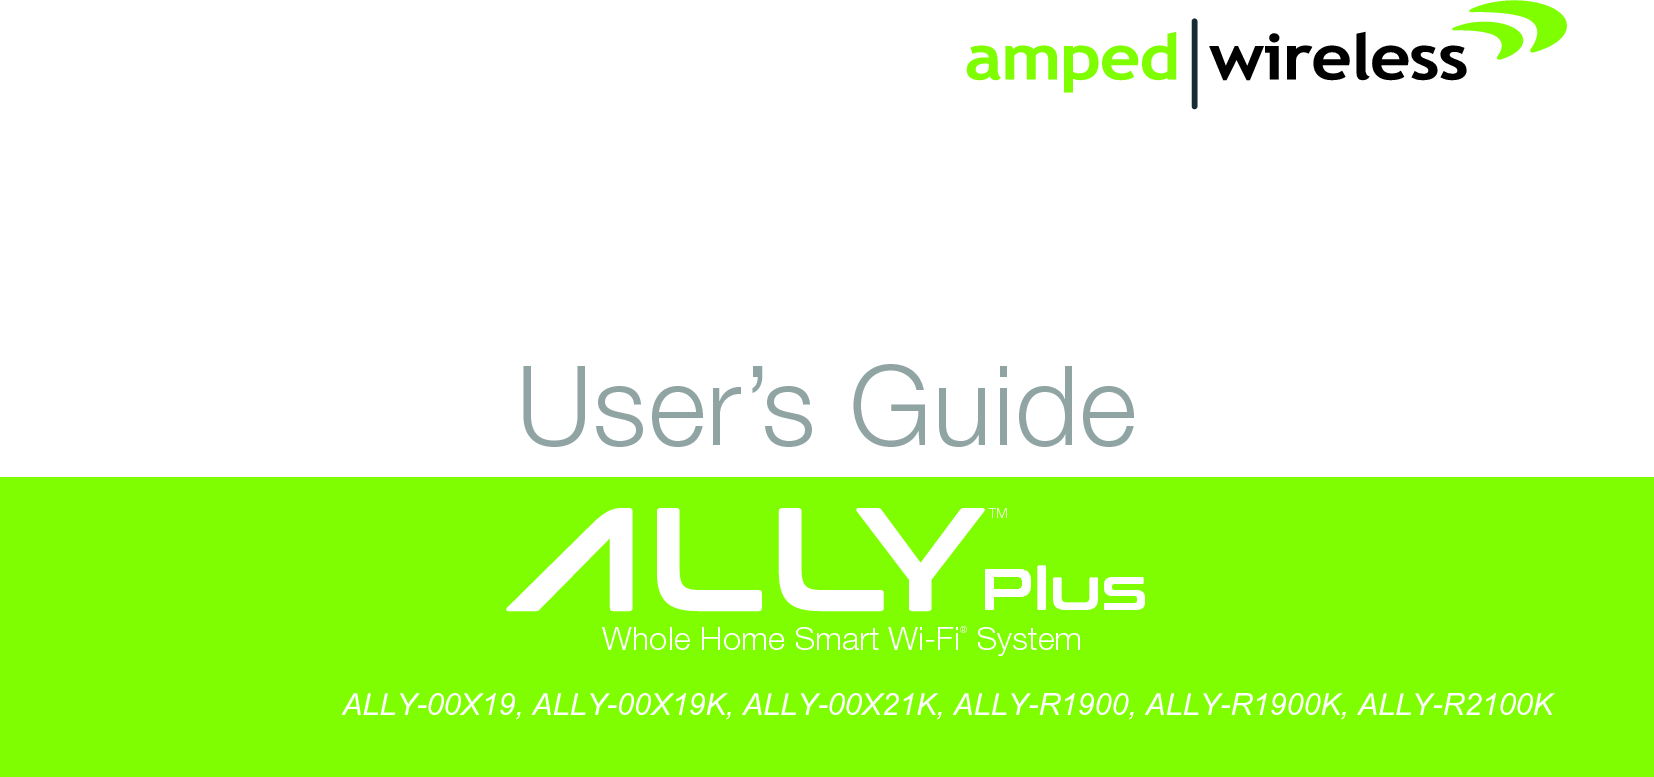 User’s GuideWhole Home Smart Wi-Fi® System ALLY-00X19, ALLY-00X19K, ALLY-00X21K, ALLY-R1900, ALLY-R1900K, ALLY-R2100KTMPlus